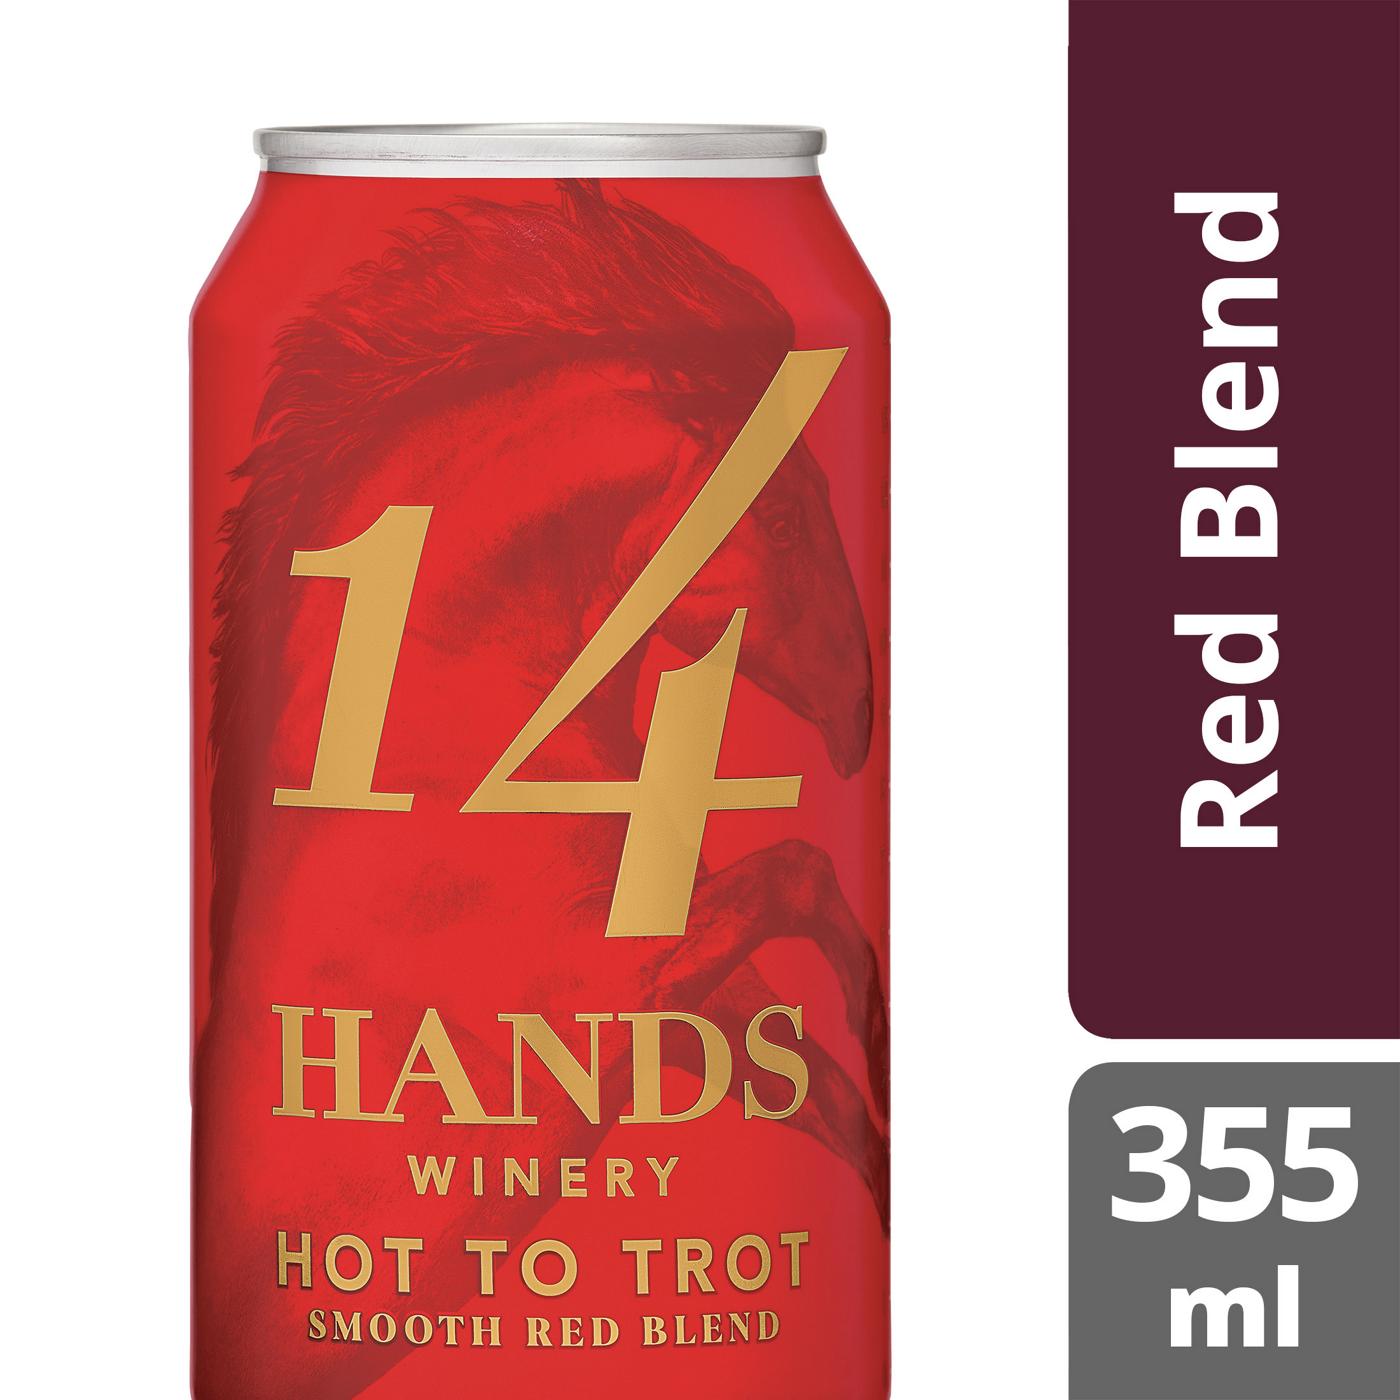 14 Hands Hot to Trot Smooth Red Blend Wine Can; image 4 of 4